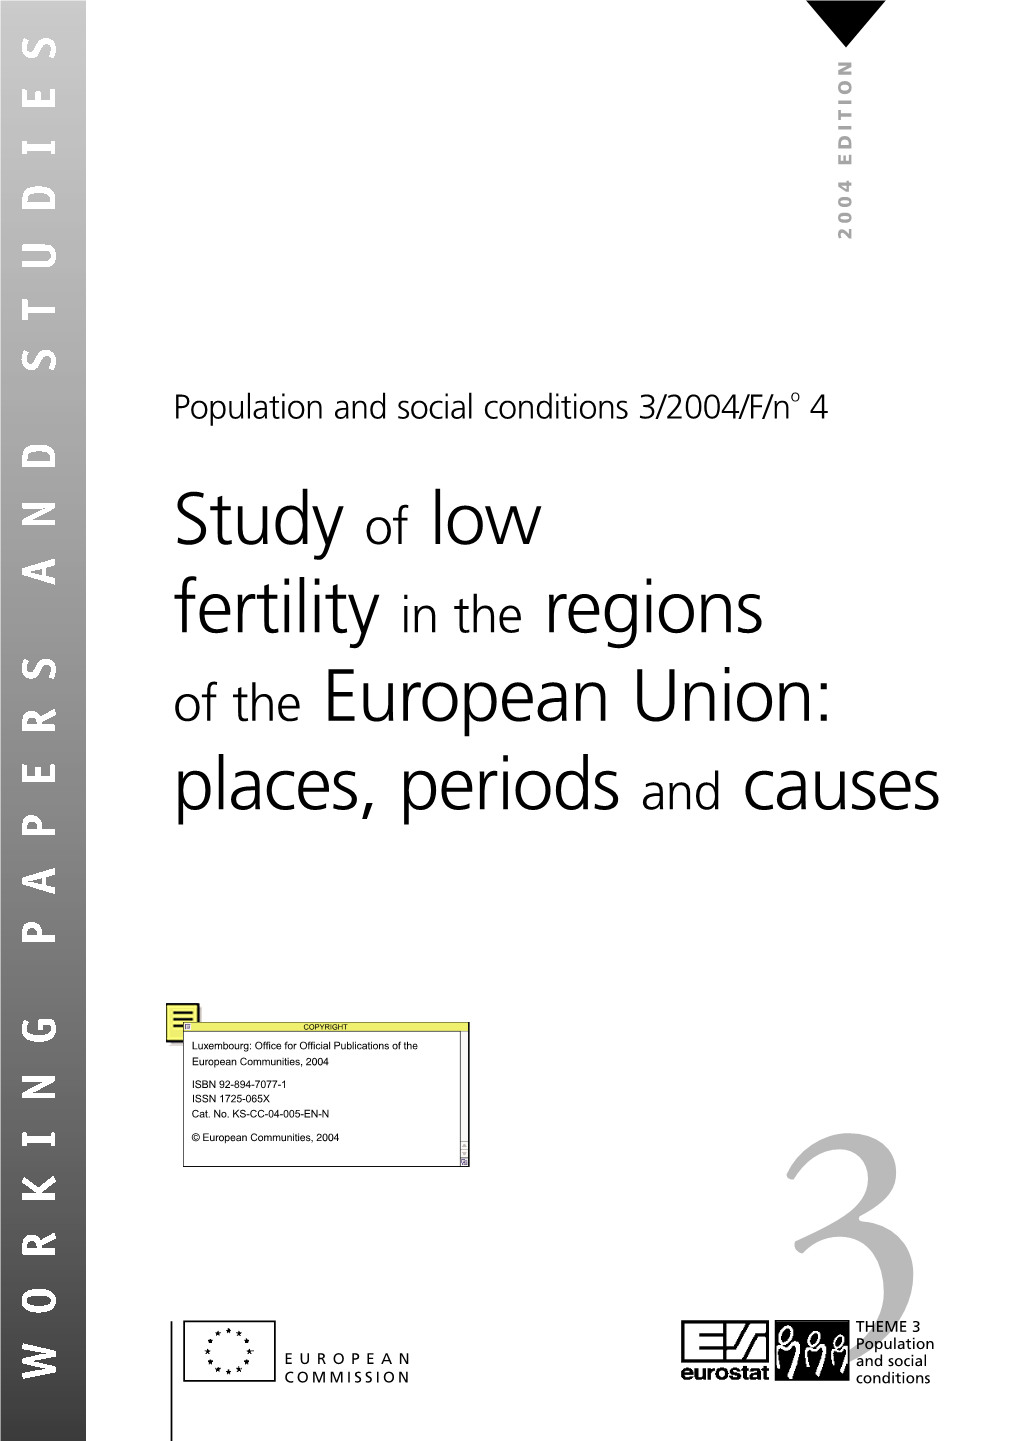 Study of Low Fertility in the Regions of the European Union: Places, Periods and Causes